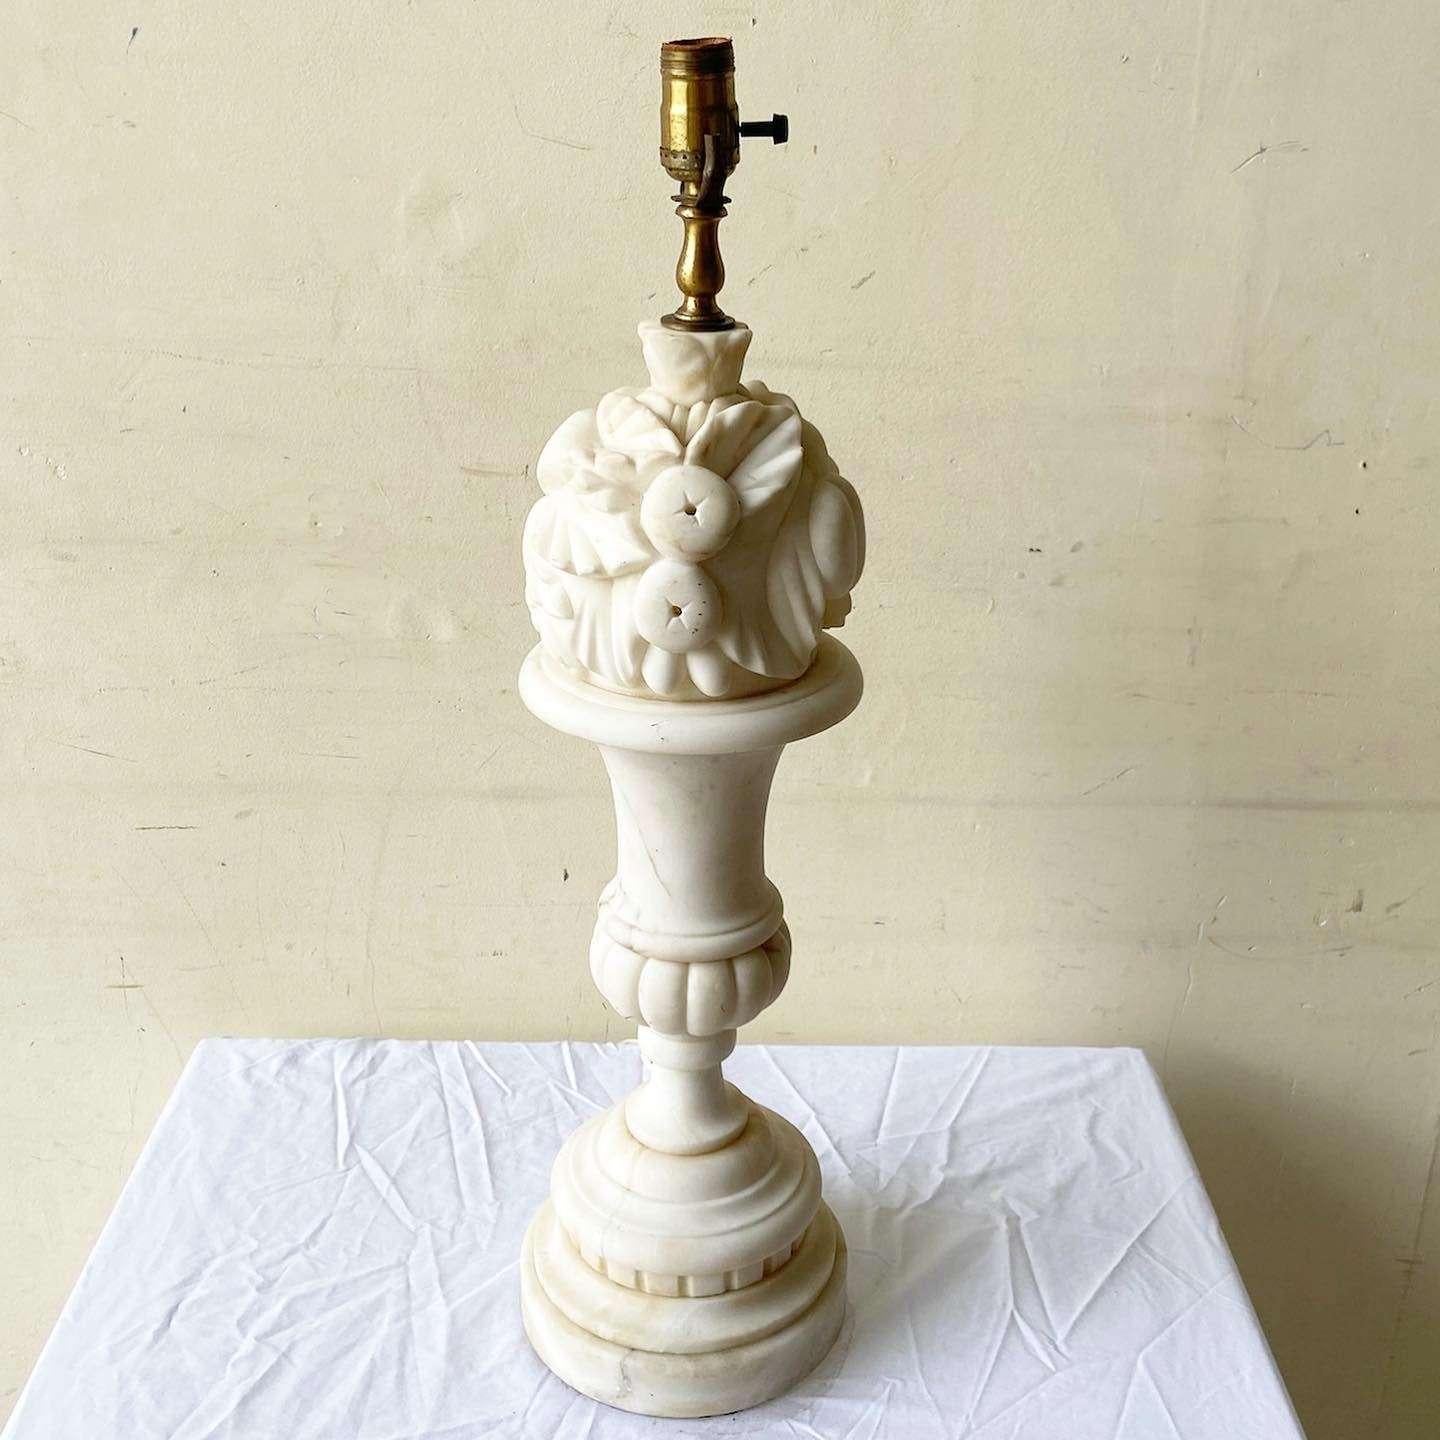 Exceptional early 20th century hand carved alabaster table lamp. Features a ornate sculpting of fruit around the top of the lamp.
